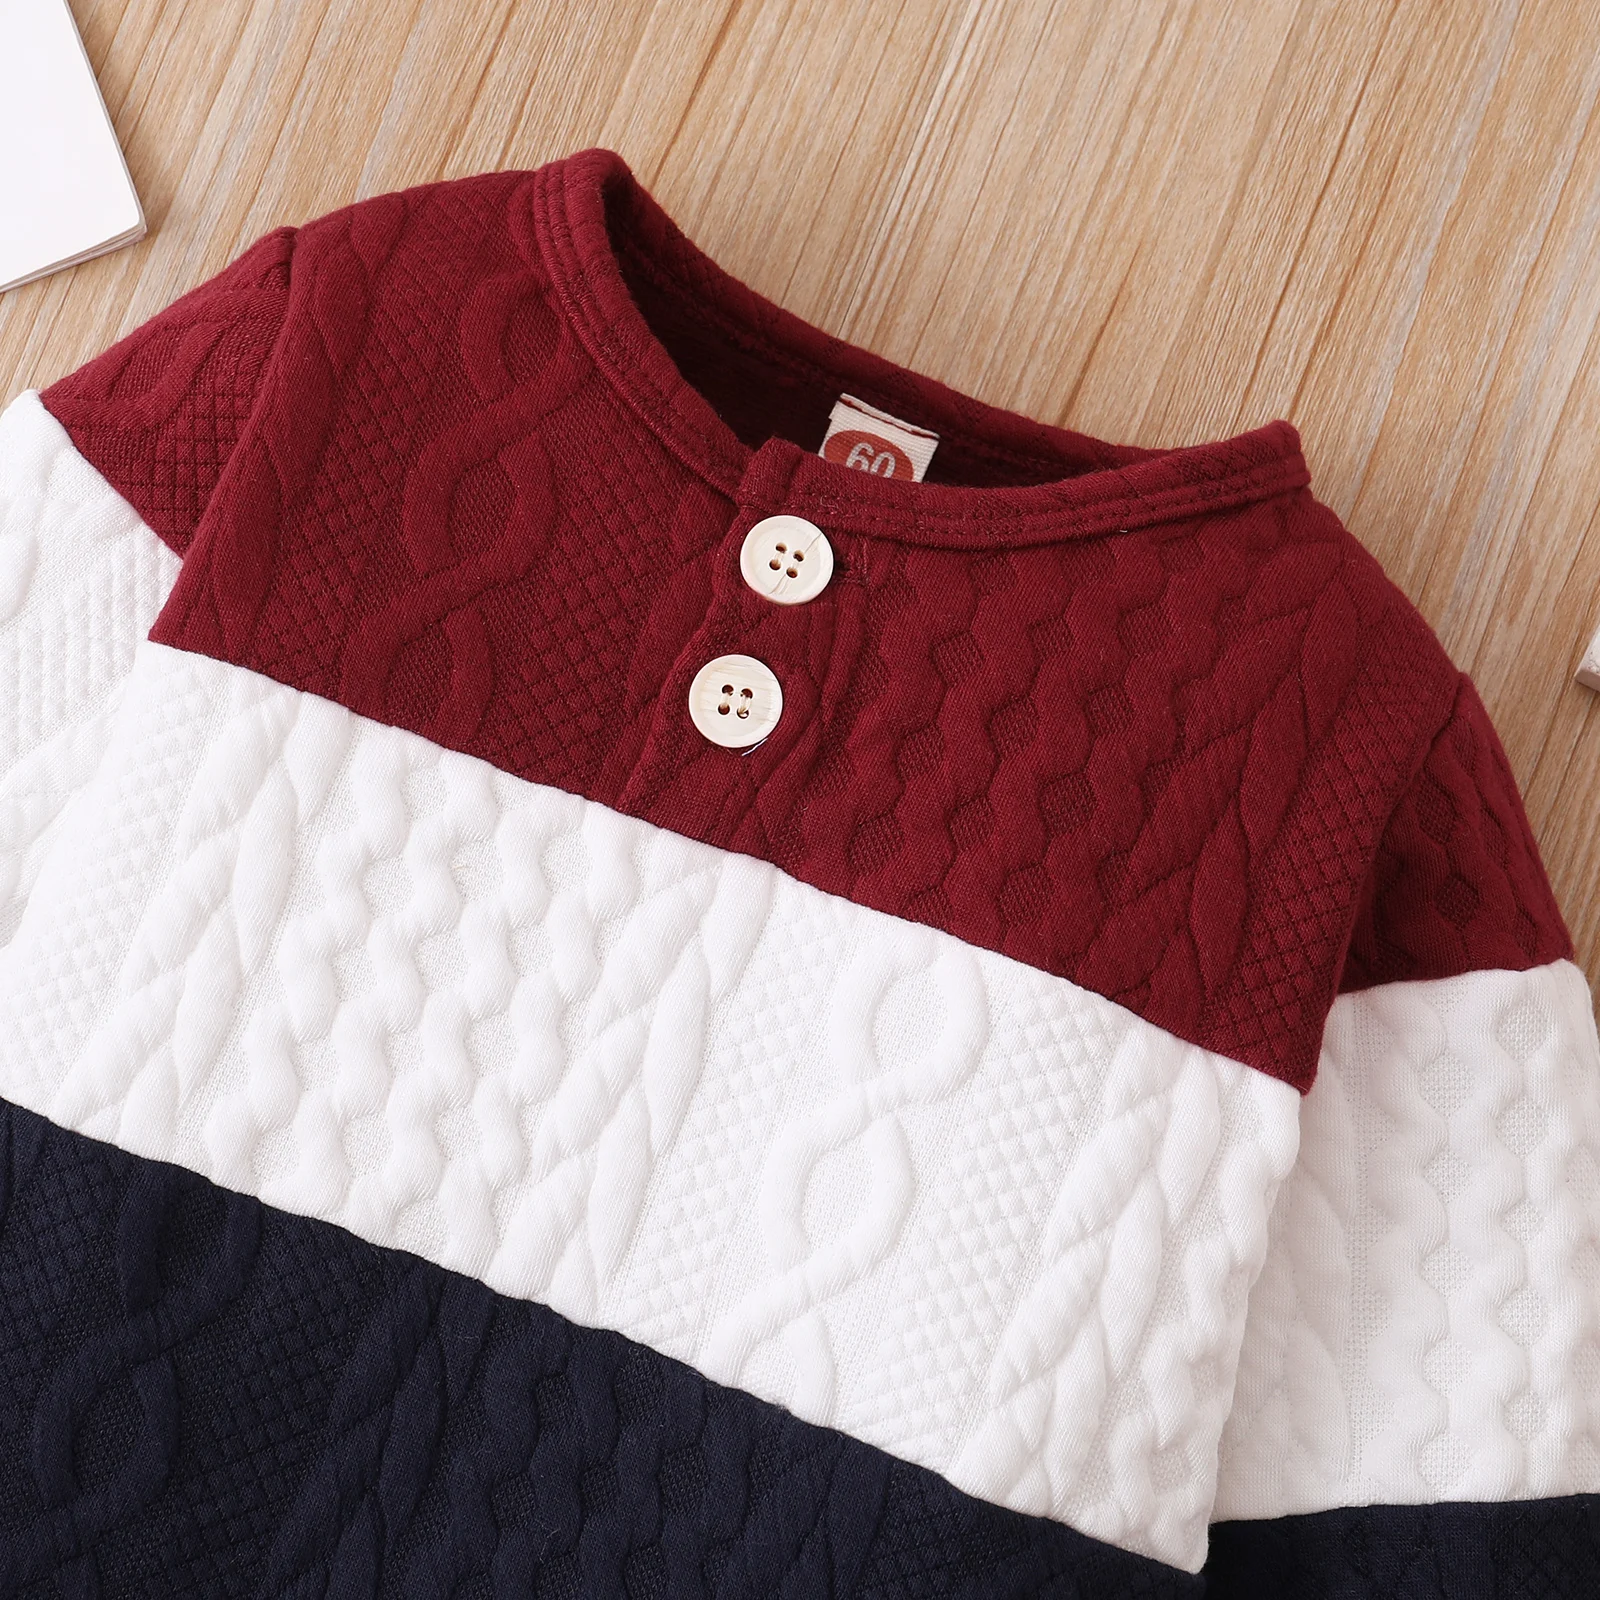 Newborn Boys Autumn and Winter Long-Sleeved Climbing Clothes: Round-Neck Color Stitched with Buttons